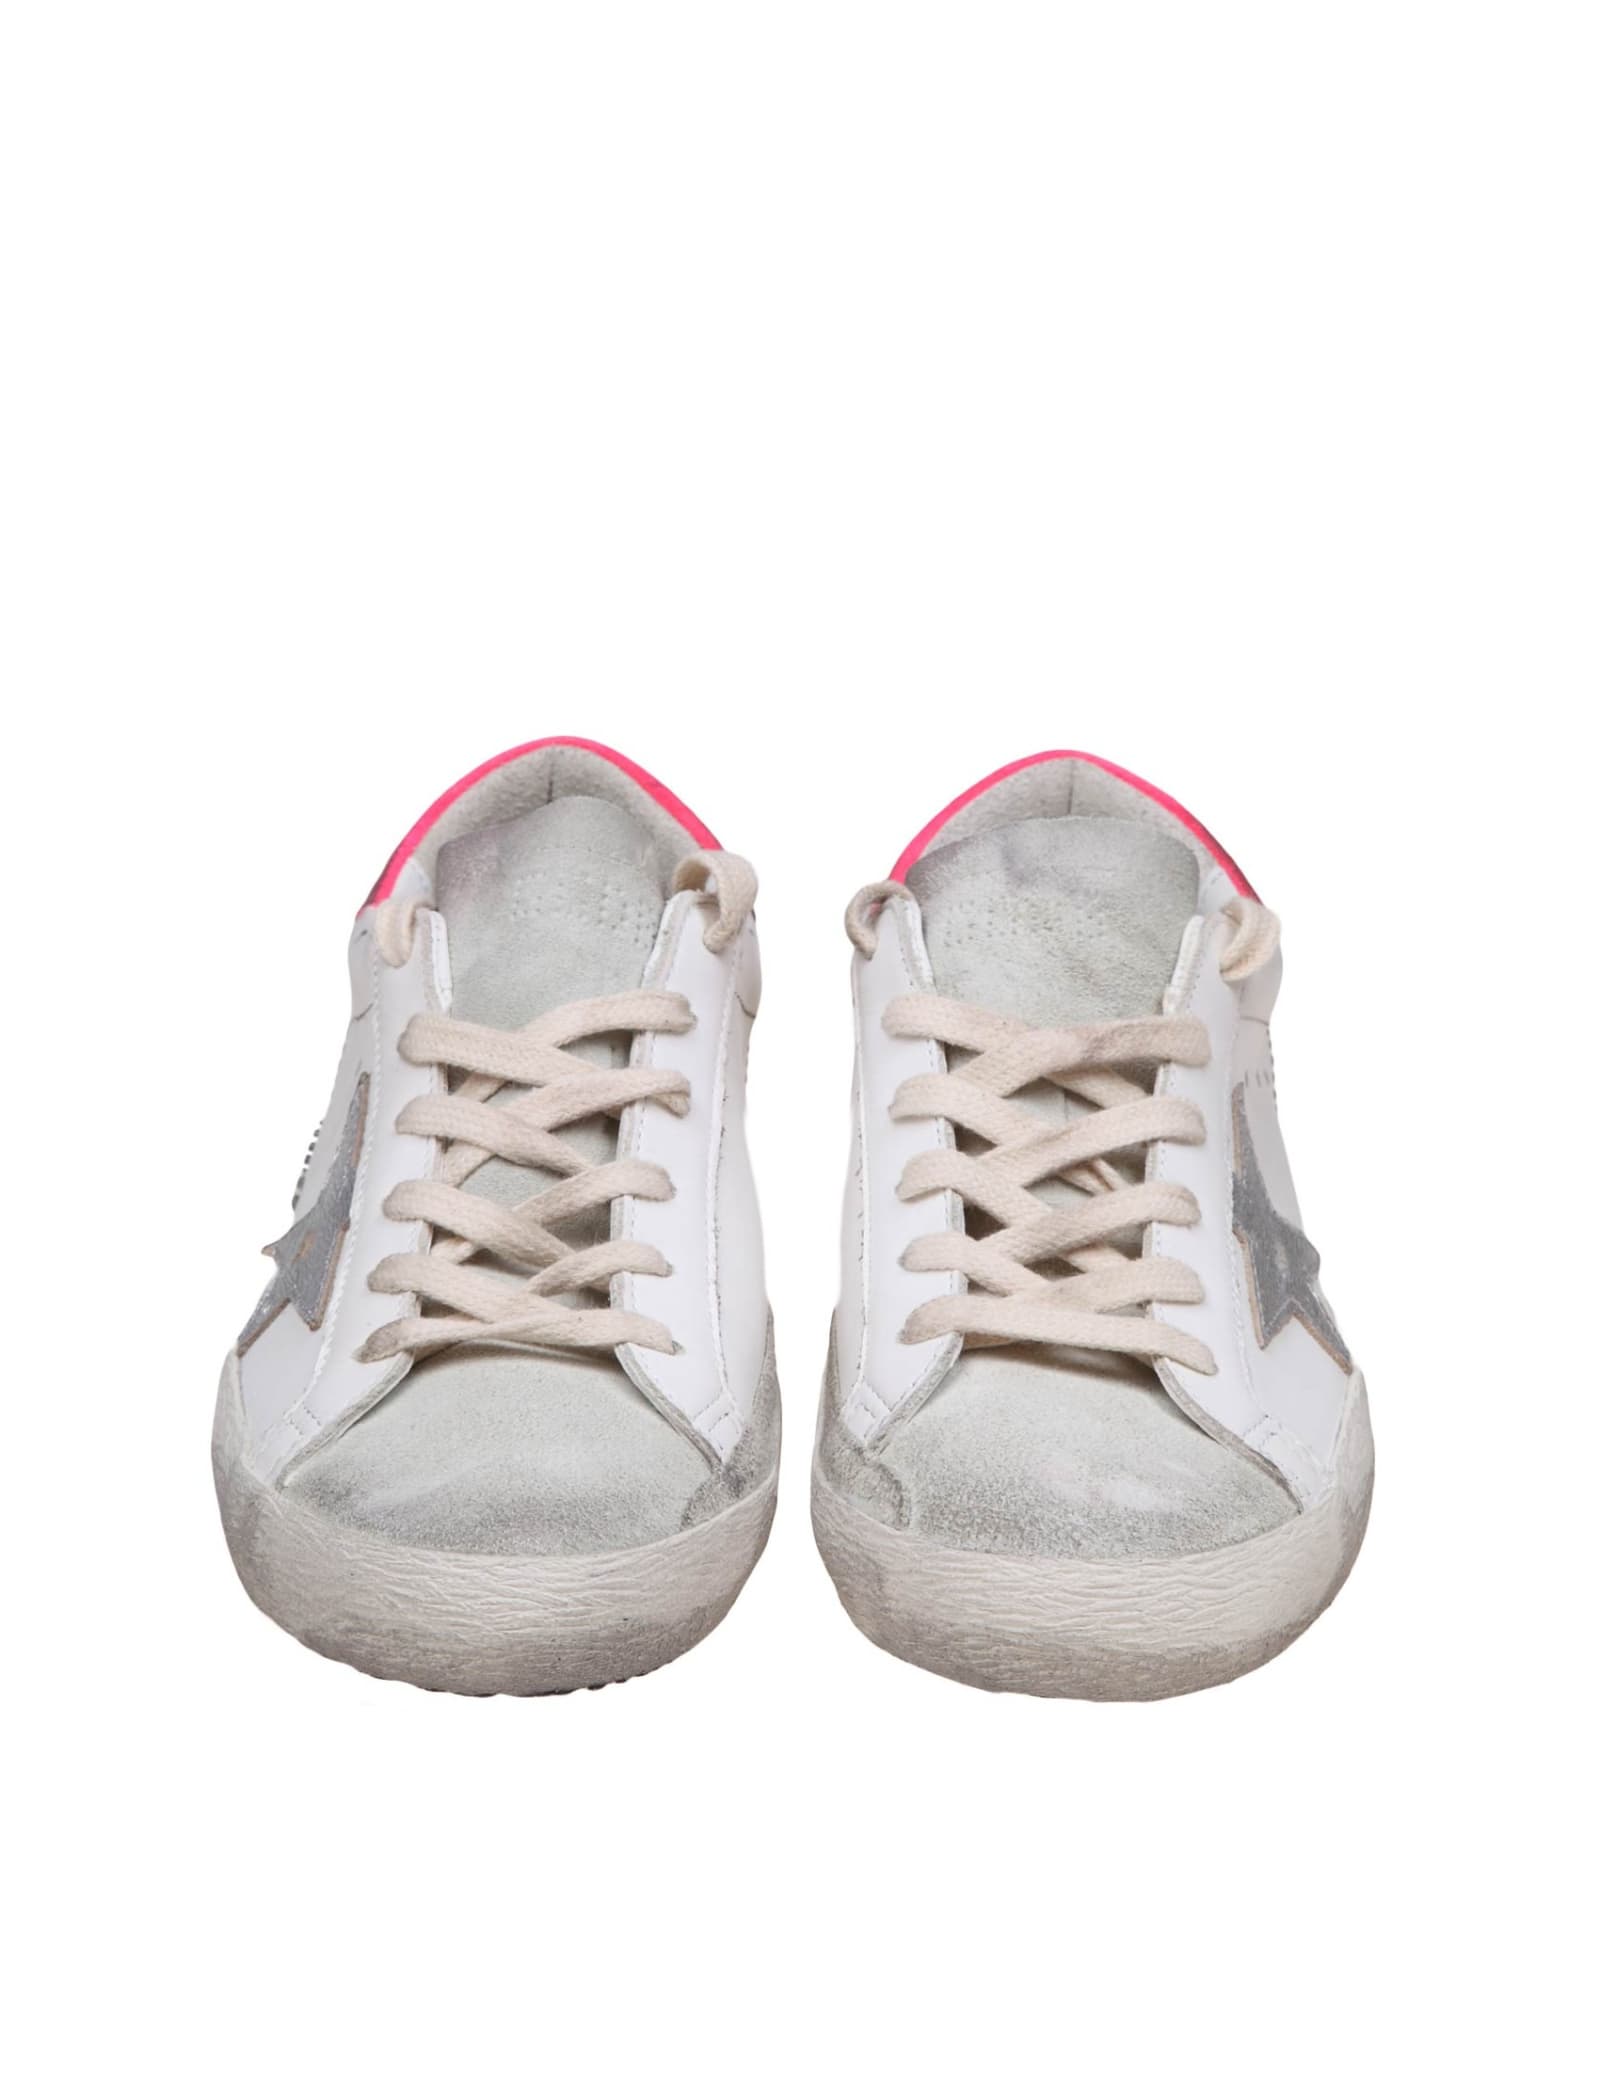 Shop Golden Goose Super-star Sneakers In White And Silver Leather And Suede In White/ice